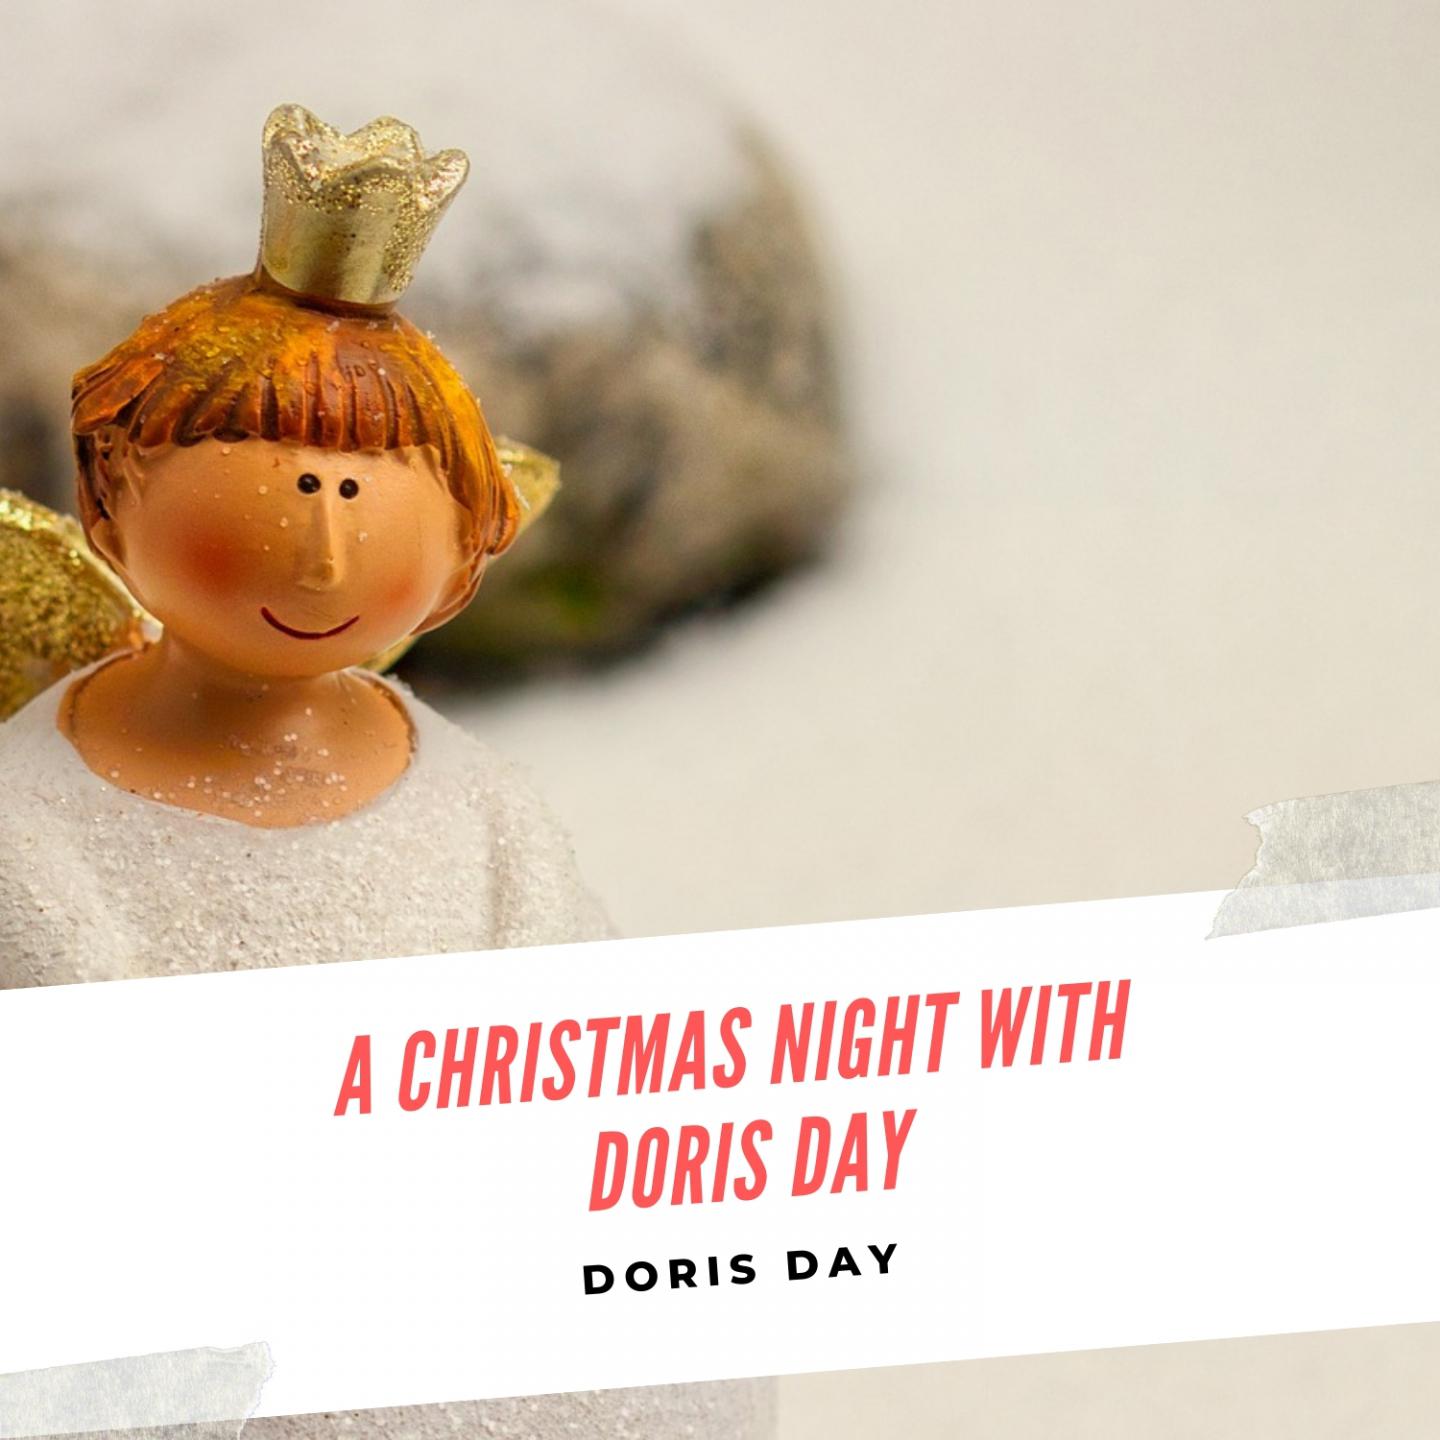 A Christmas Night with Doris Day